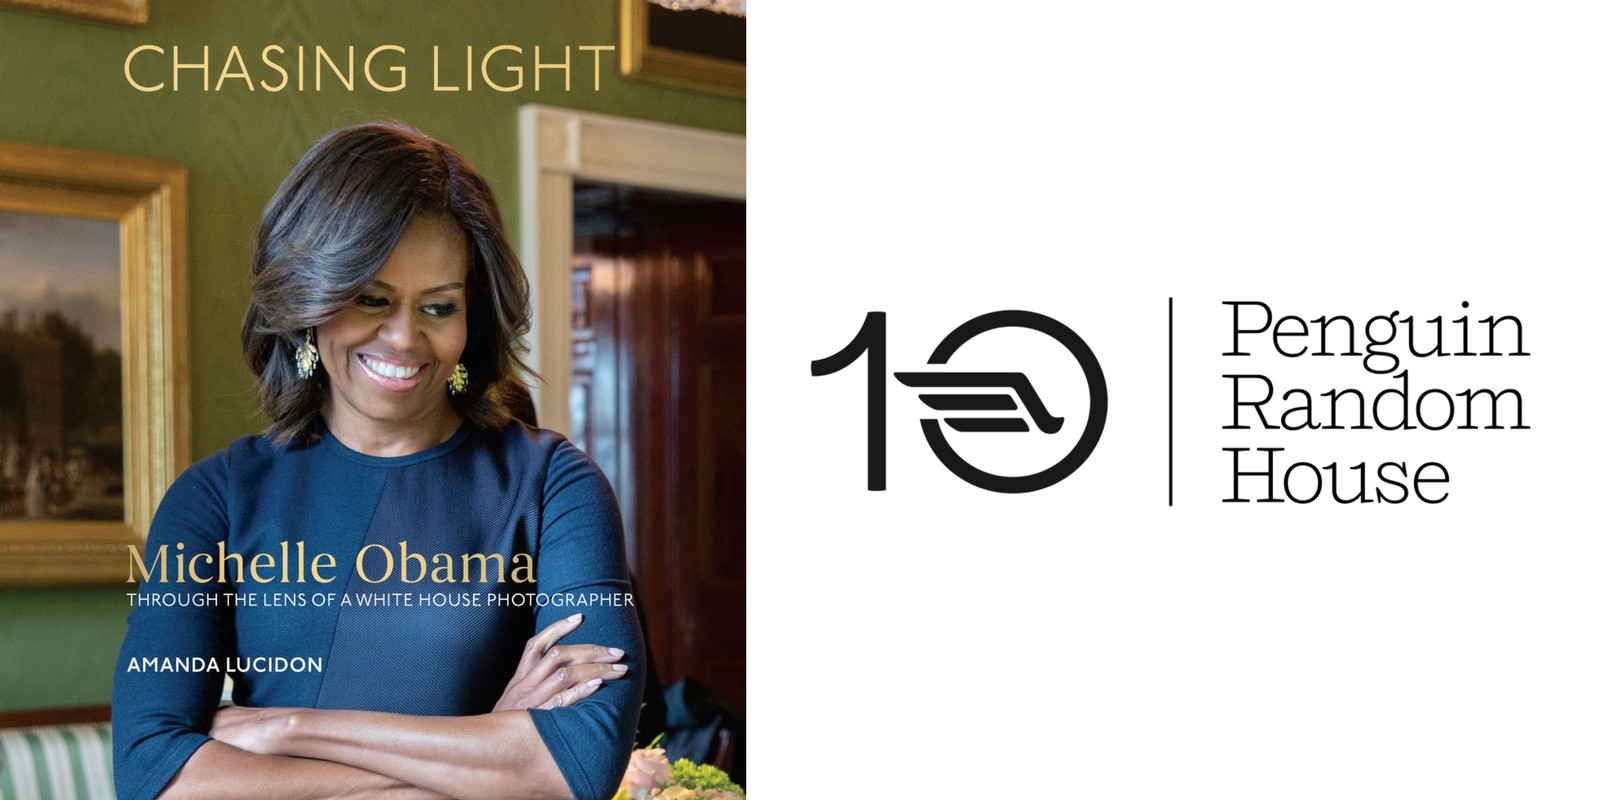 Vibrant Photographs of Michelle Obama by Amanda Lucidon in New Book Coming in October